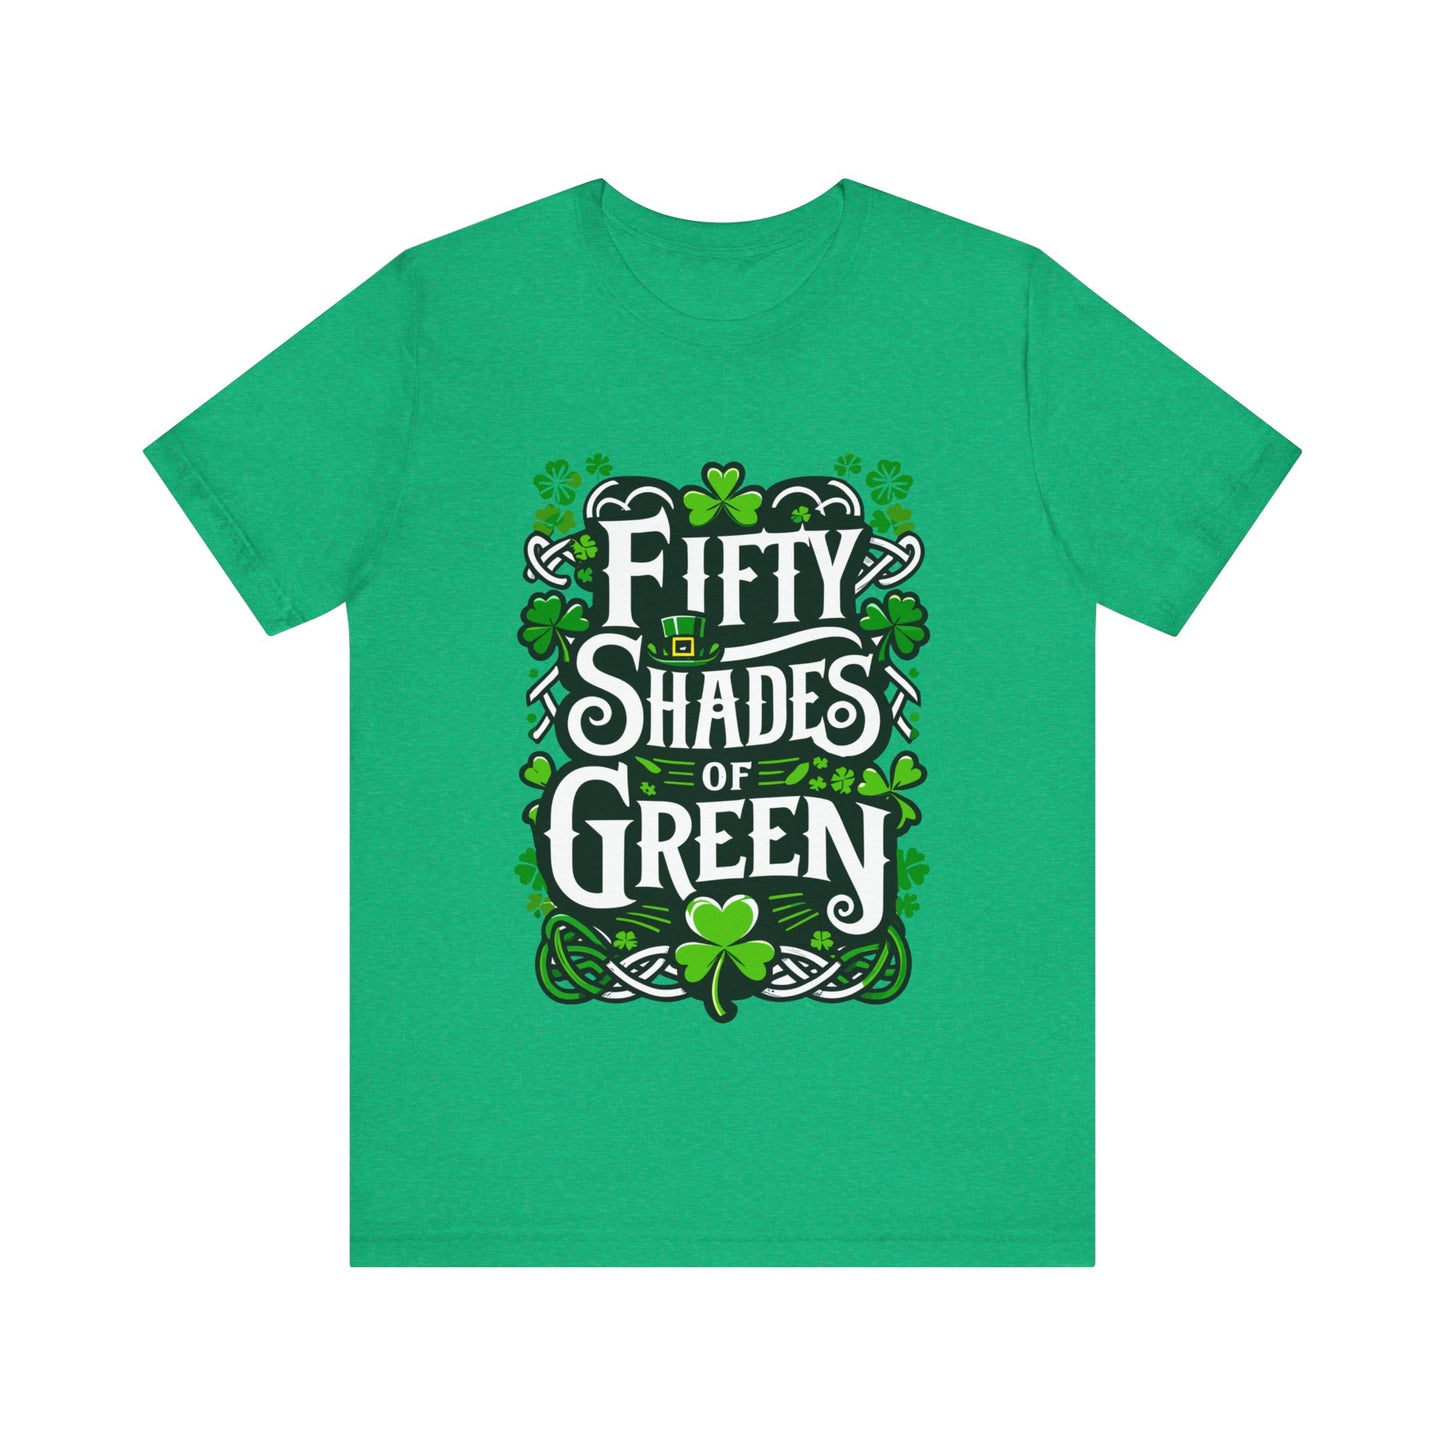 Fifty Shades Of Green - Unisex T-Shirt